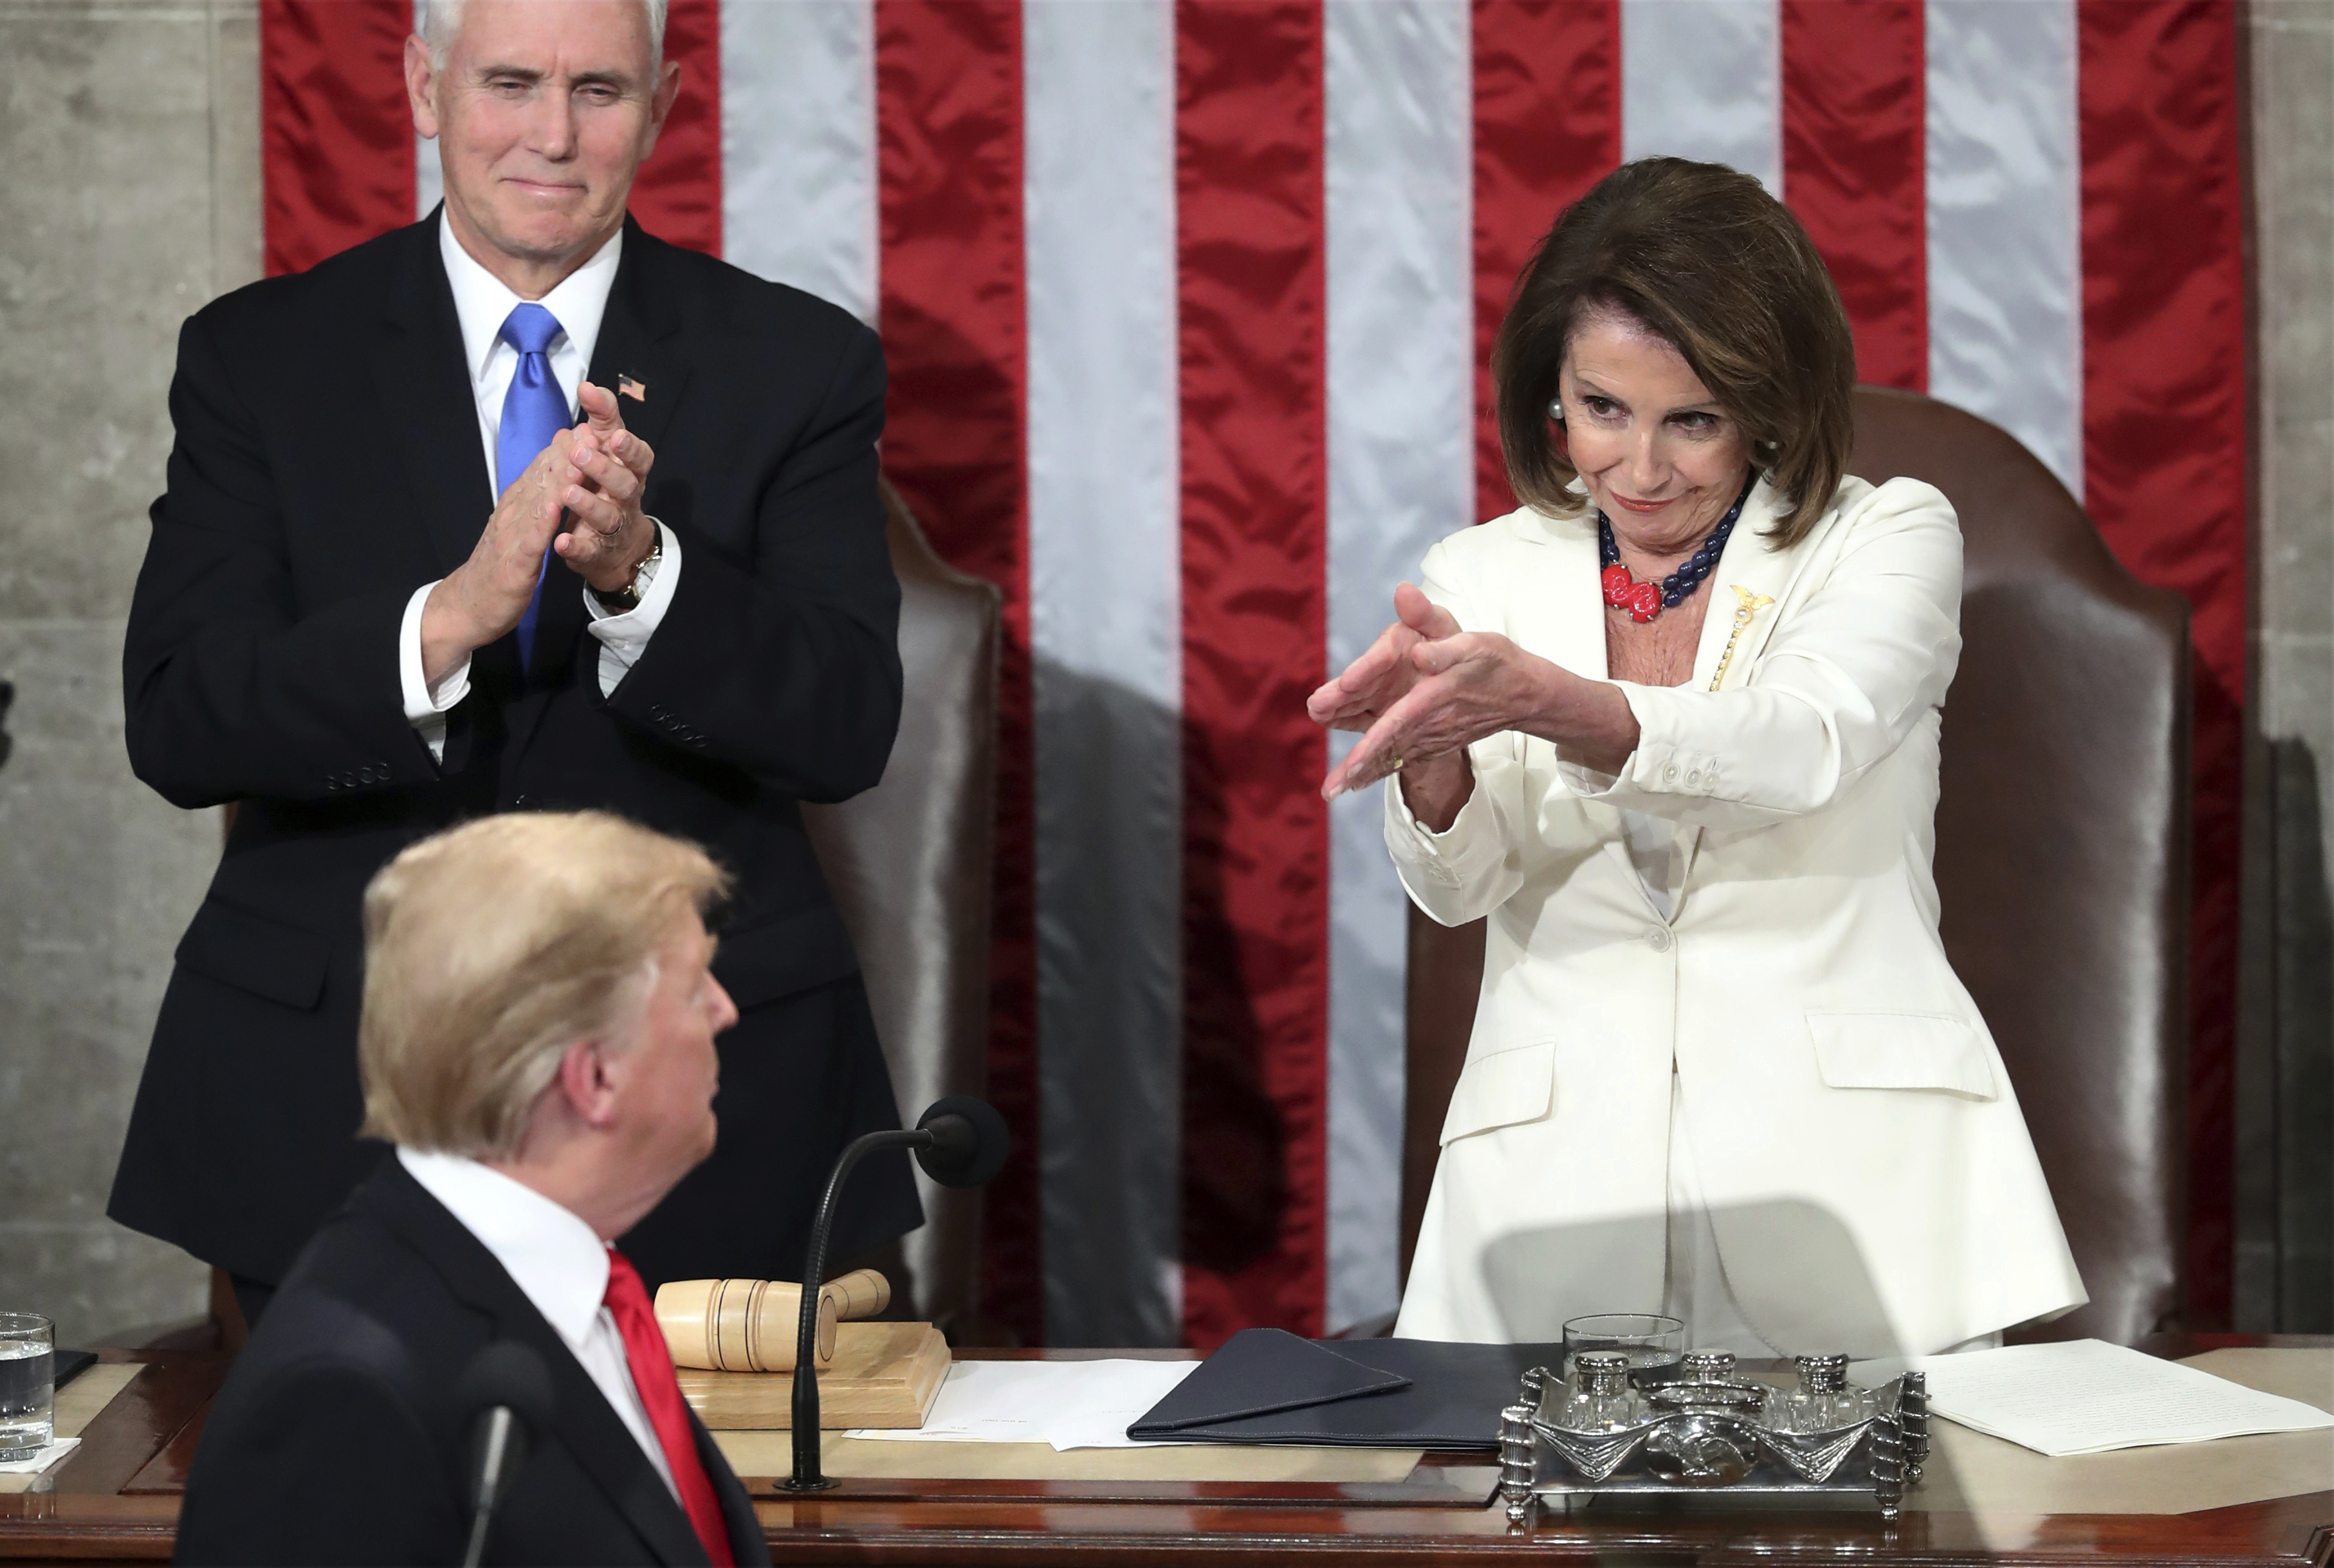 File photo: US President Donald Trump turns to House Speaker Nancy Pelosi, as he delivers his State of the Union address to a joint session of Congress on Capitol Hill in Washington.